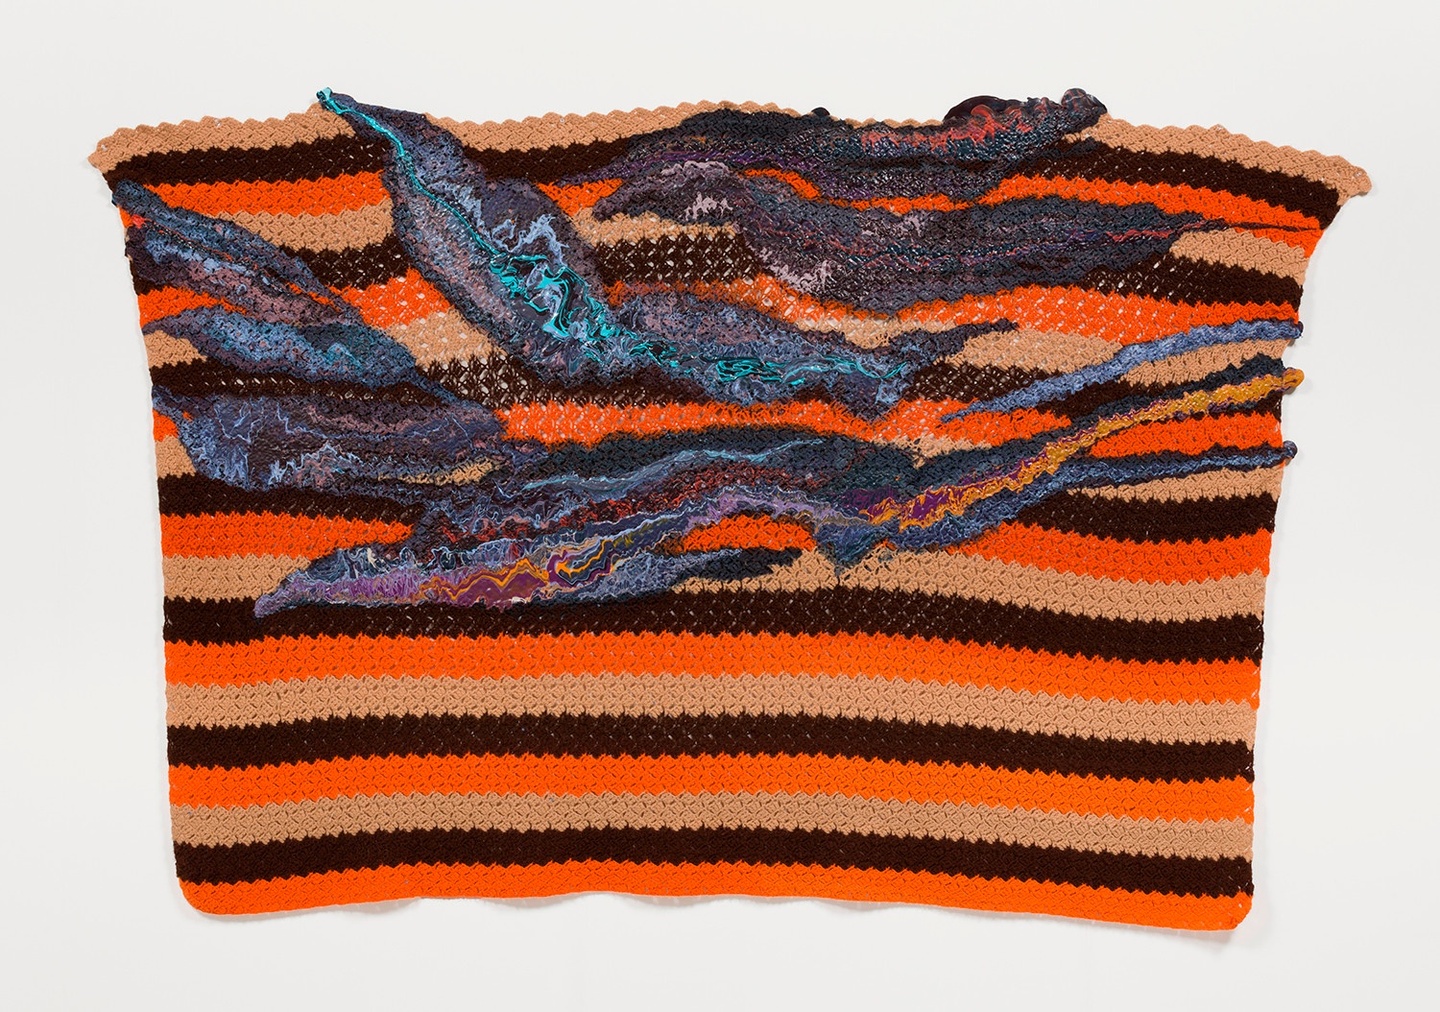 A knitted blanket with horizontal stripes and sections of multicolored paint in the top half